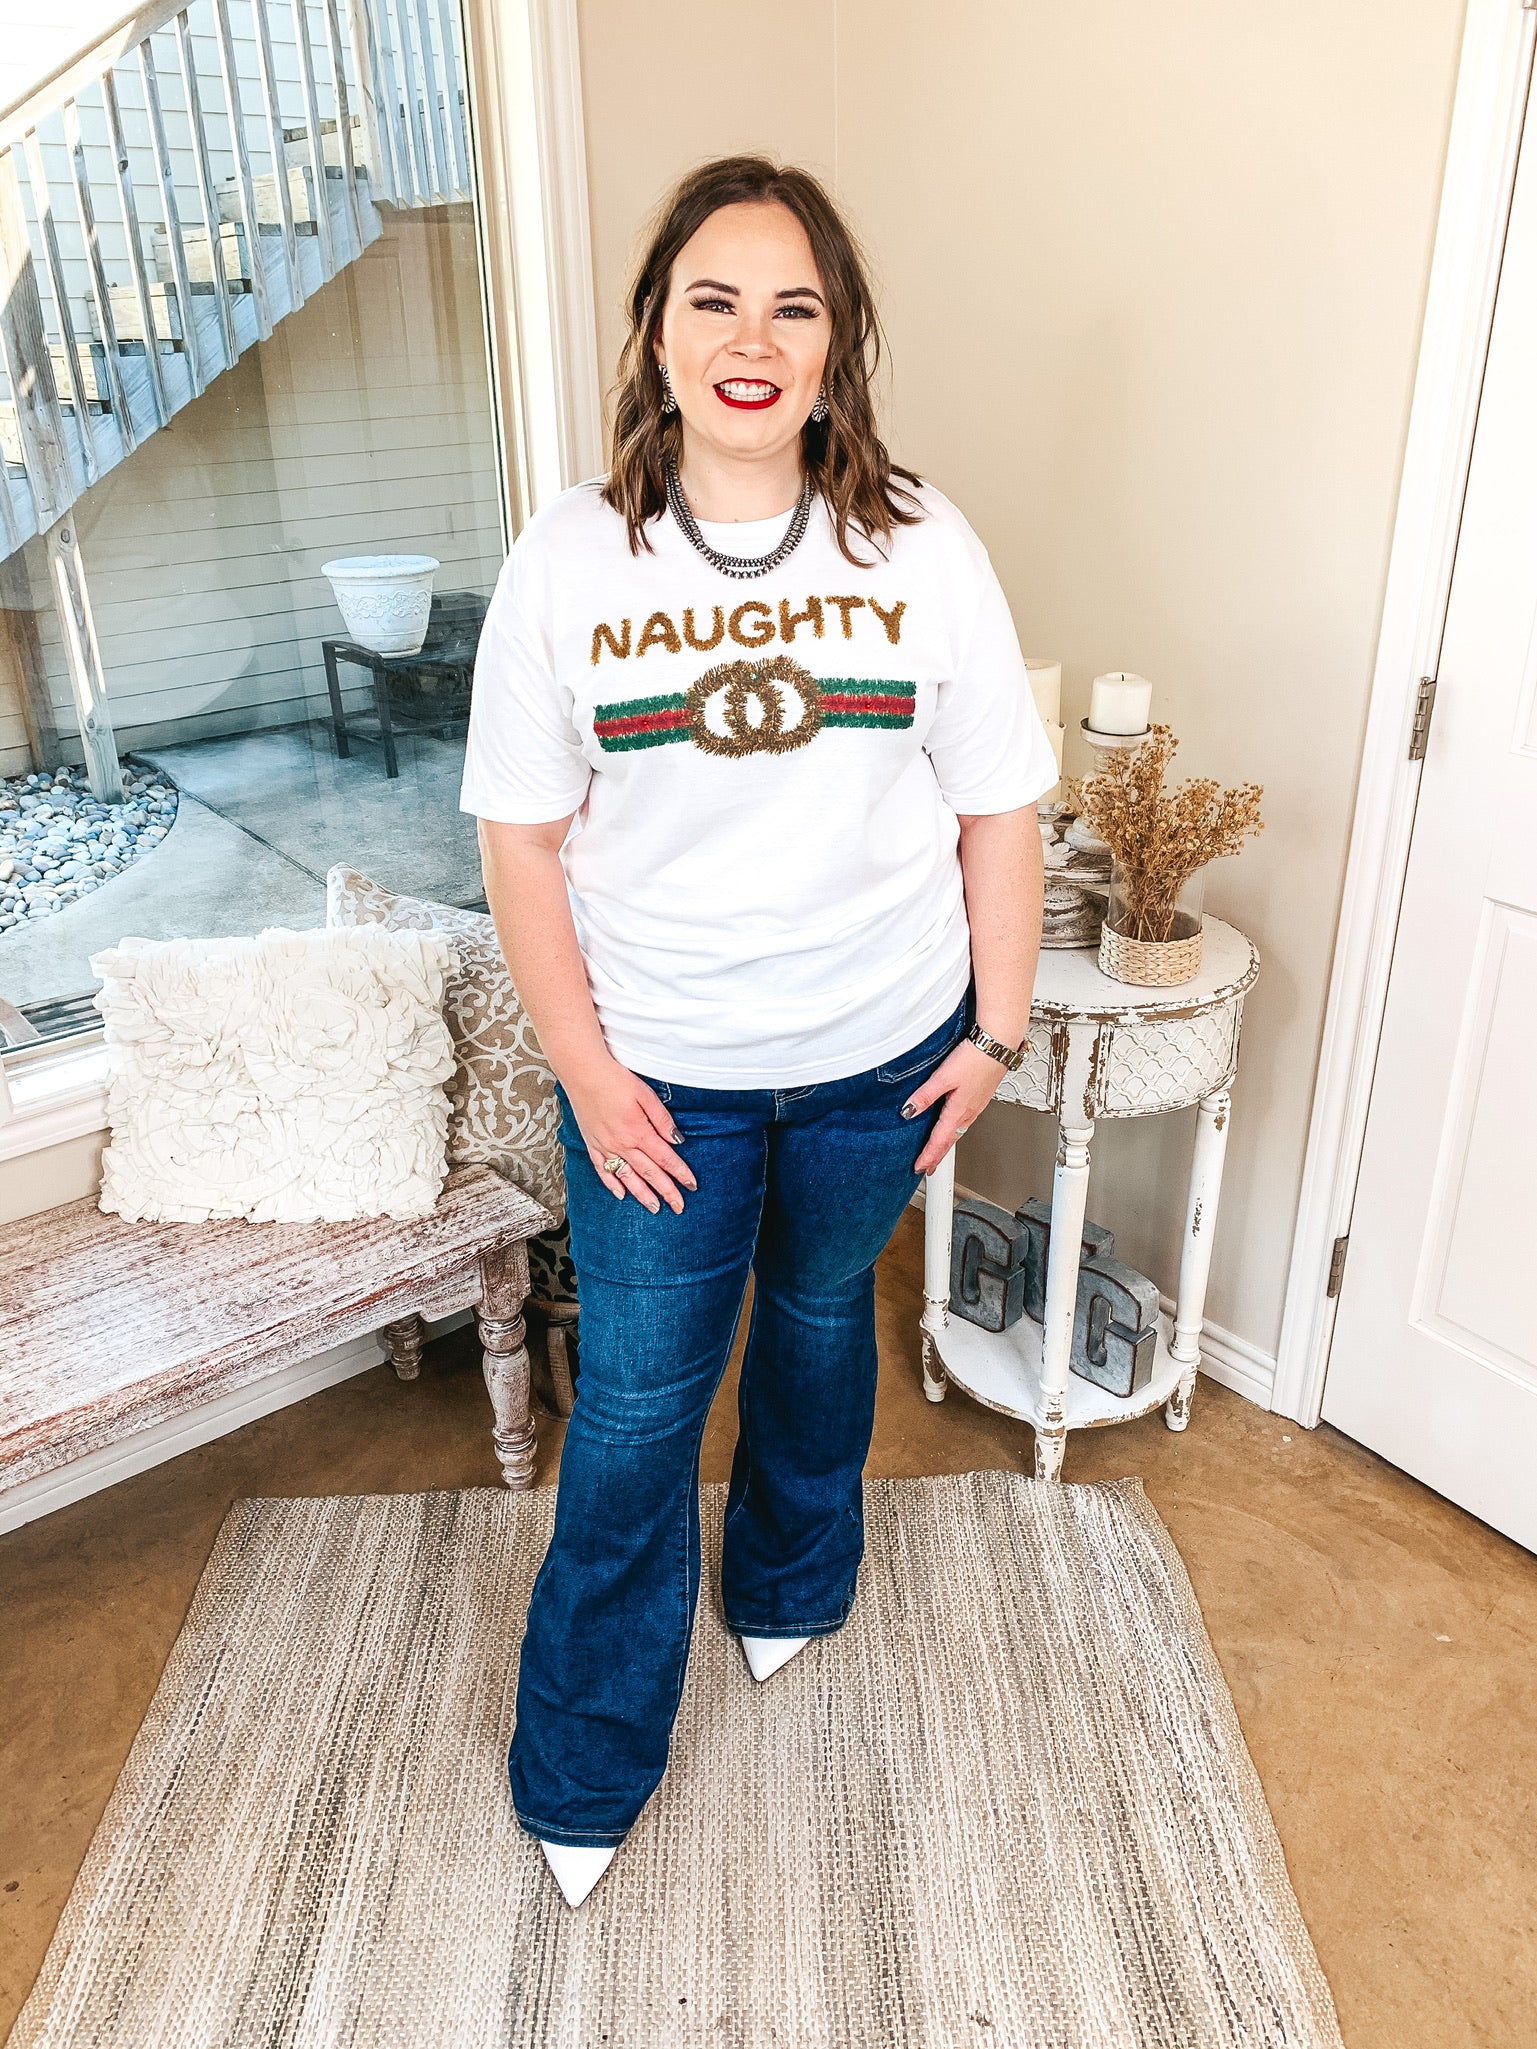 Naughty Gold Tinsel Graphic Tee in White - Giddy Up Glamour Boutique